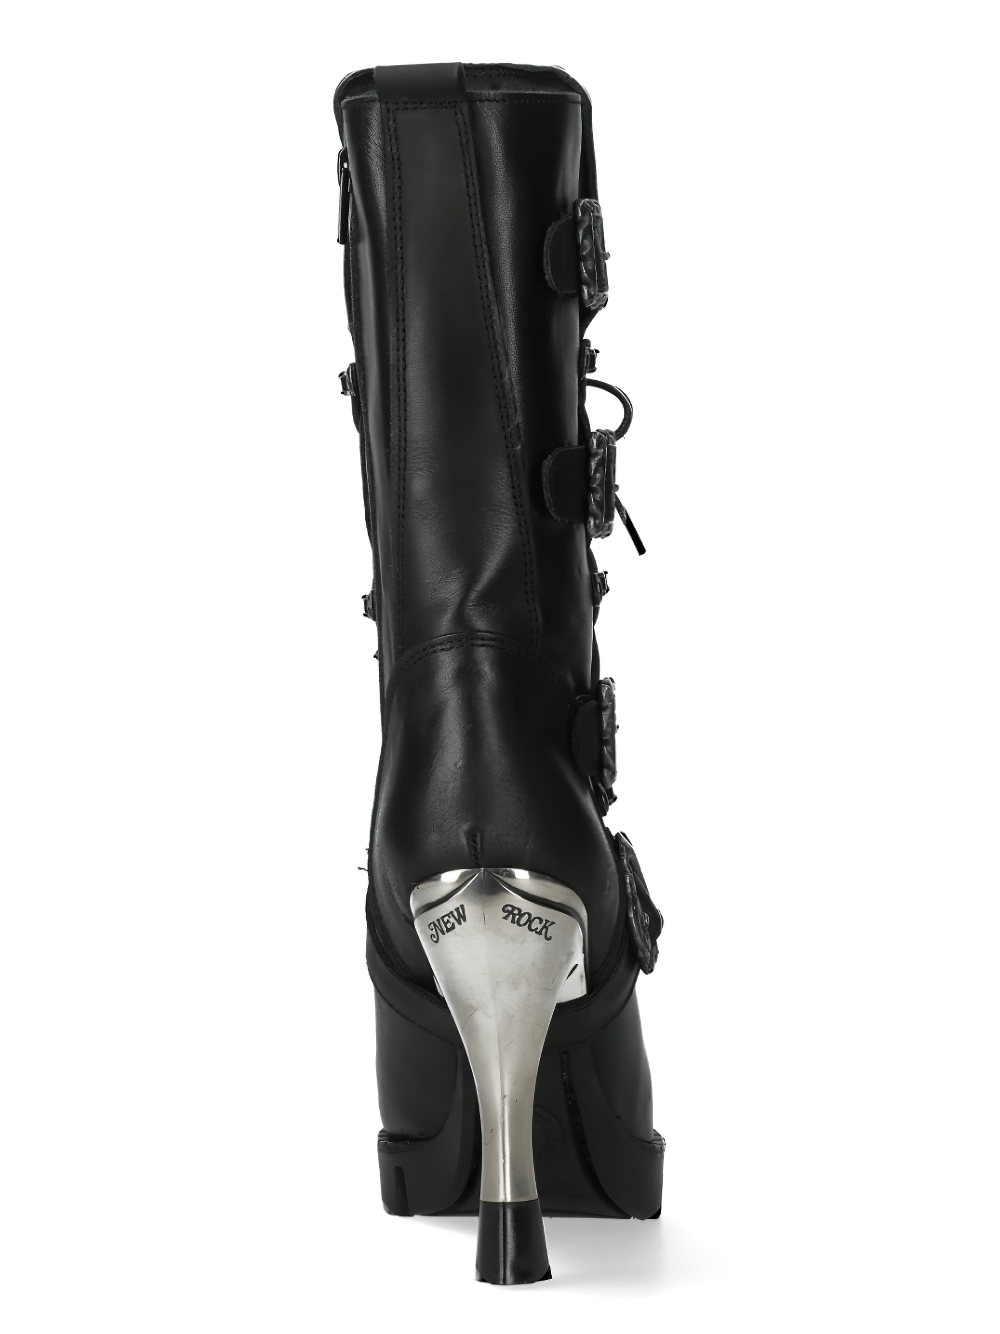 NEW ROCK Chic Urban Black Buckled Lace-Up Heel Boots